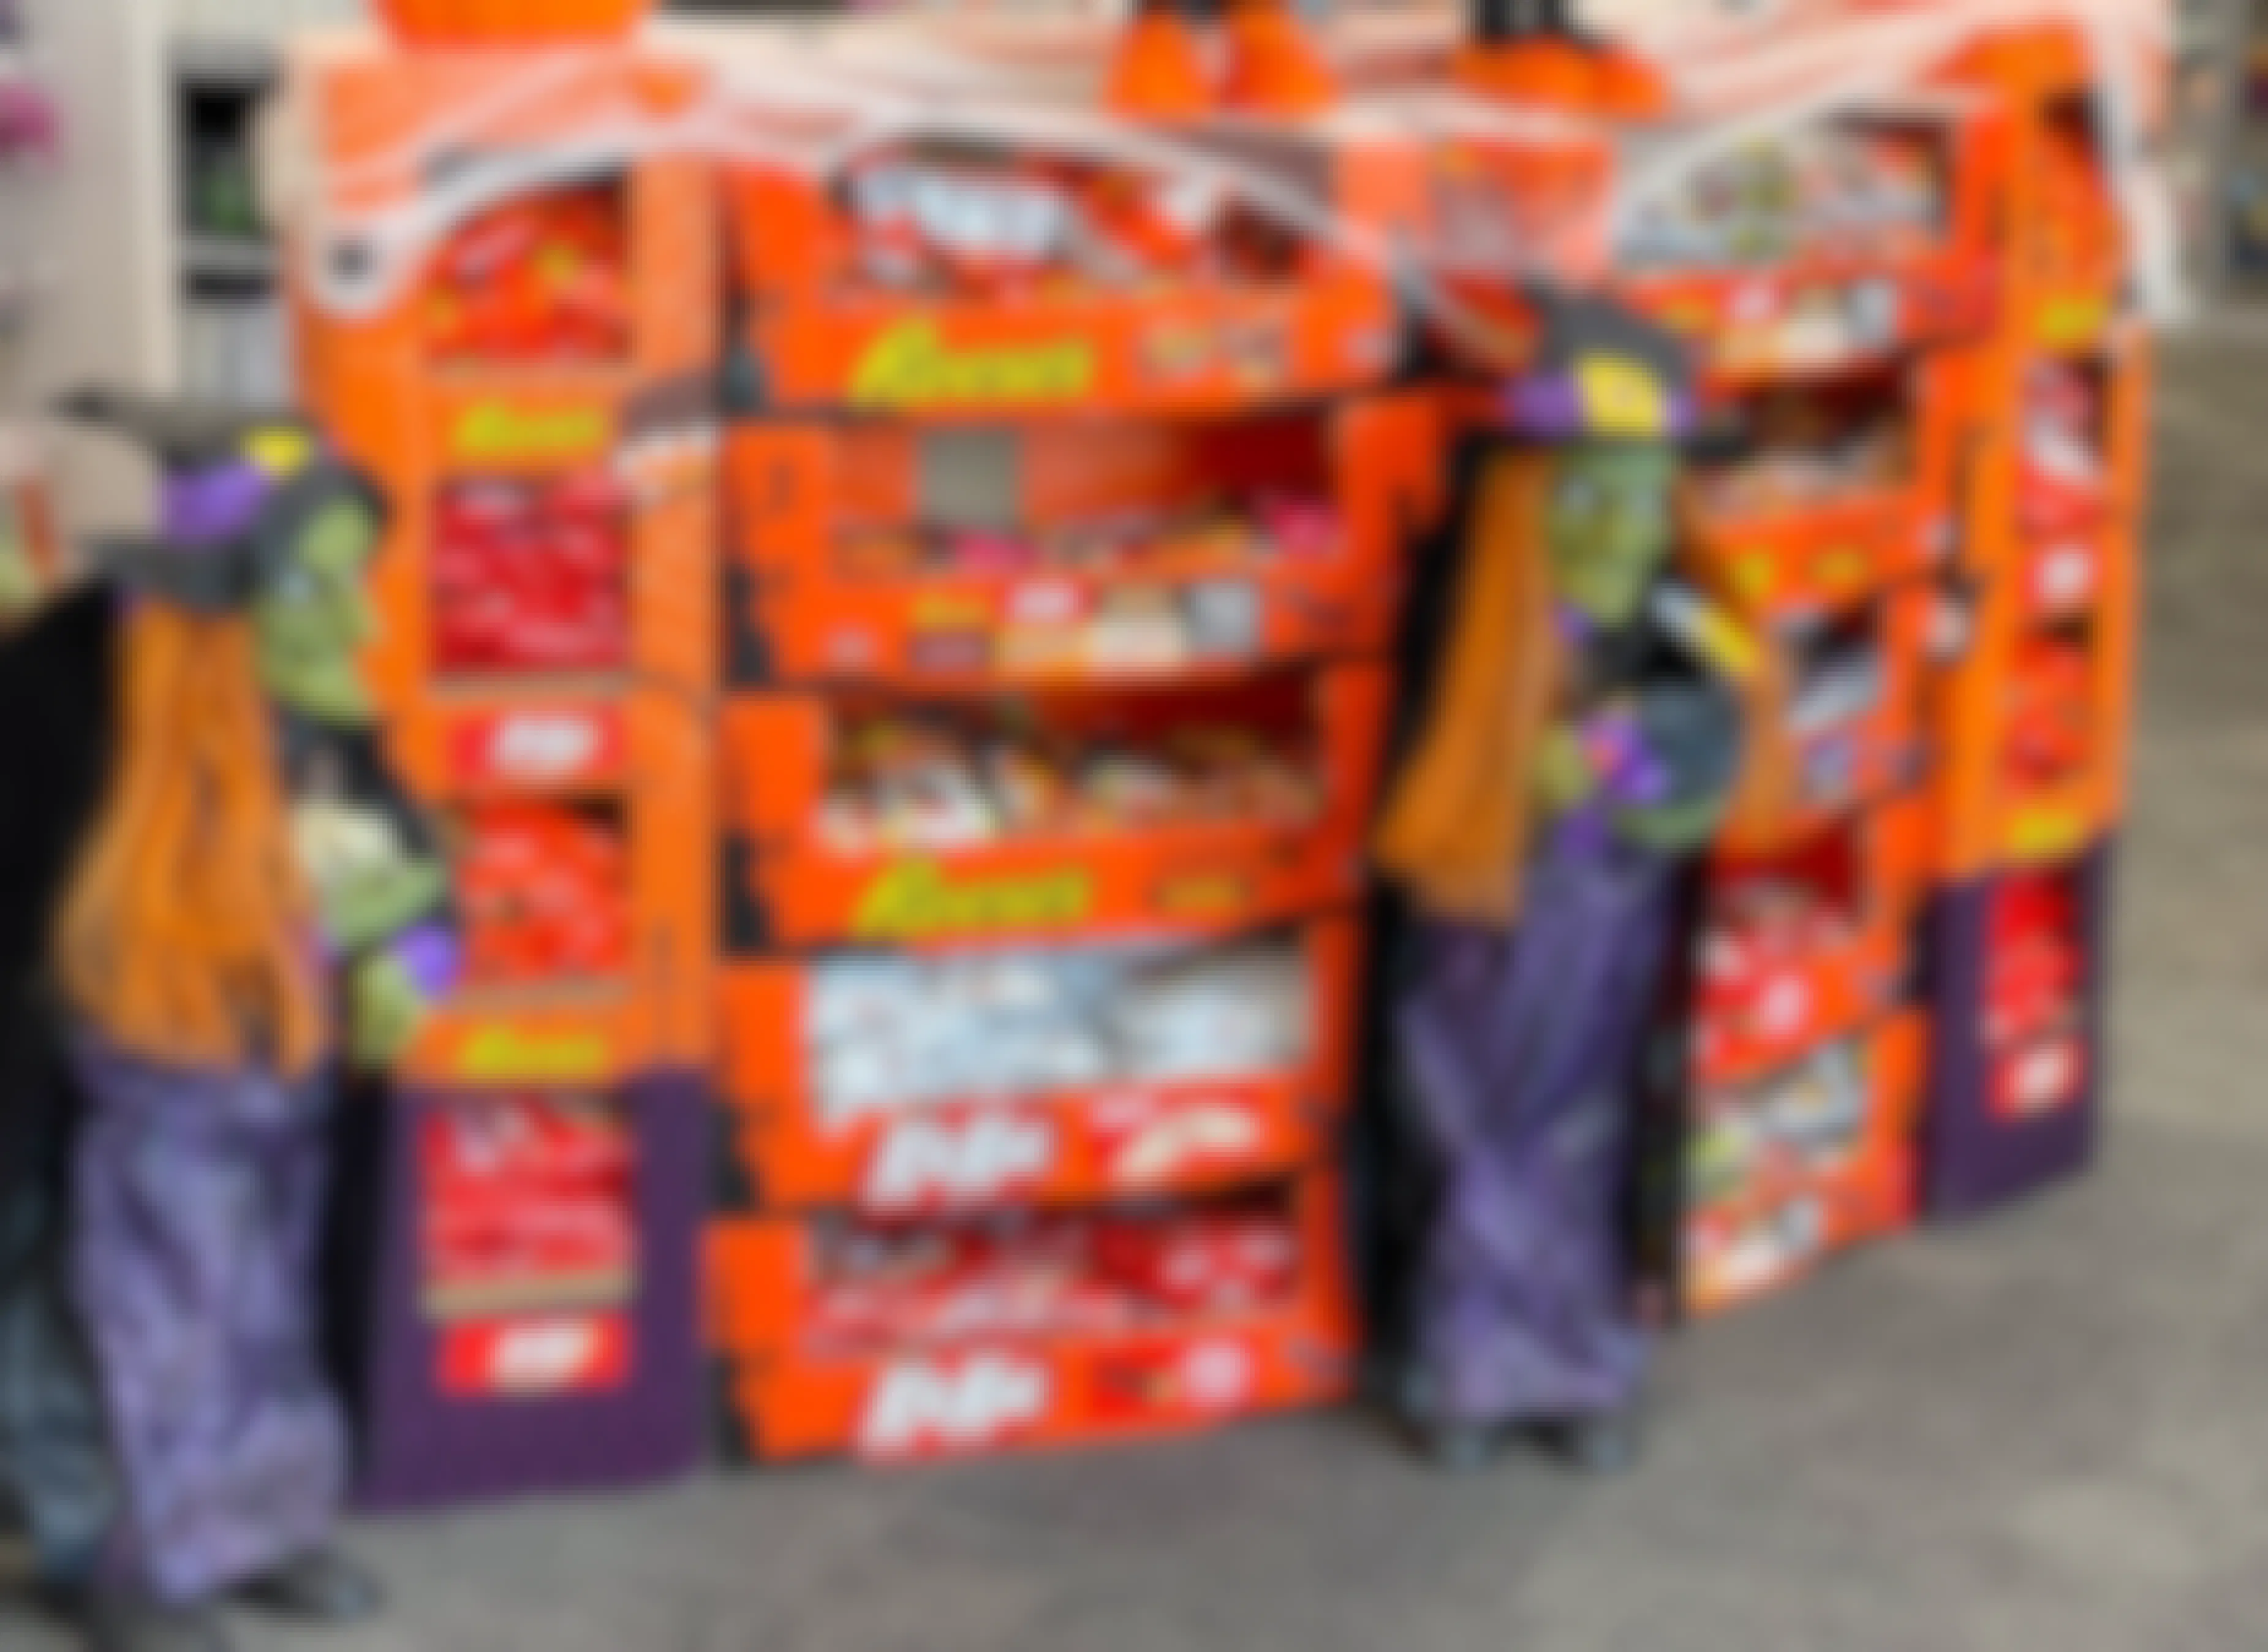 A display of Halloween candy and some witch decorations at a store.